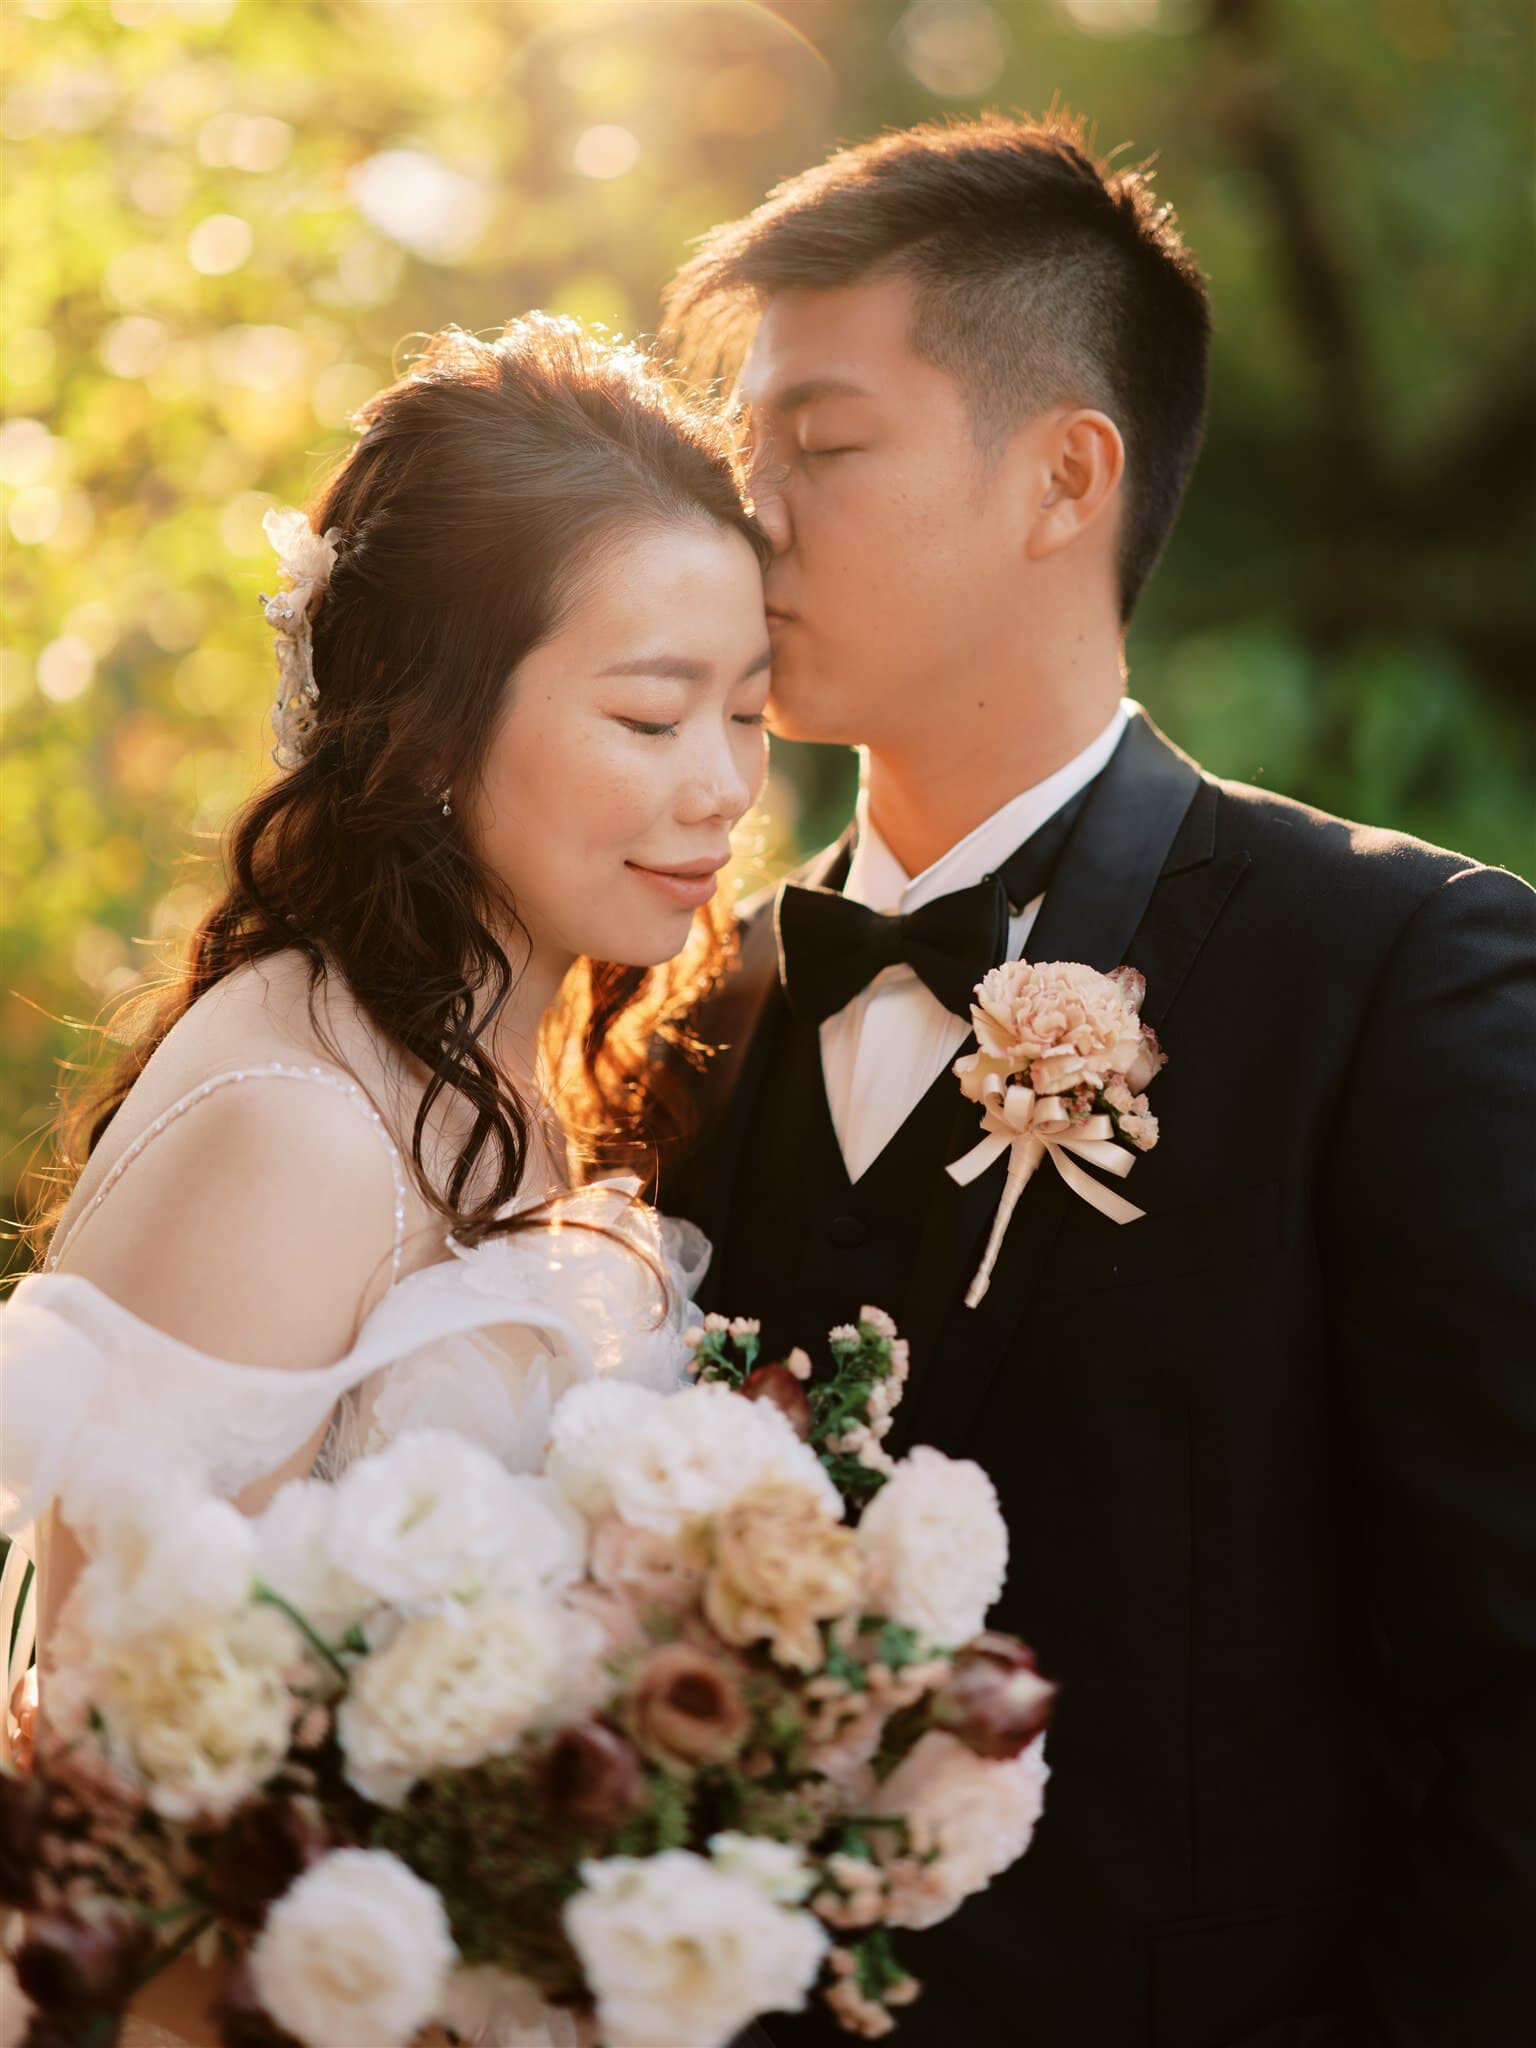 Kyoto Tokyo Japan Elopement Wedding Photographer, Planner & Videographer | A bride and groom kissing in the sunlight captured by a talented Japan elopement photographer.